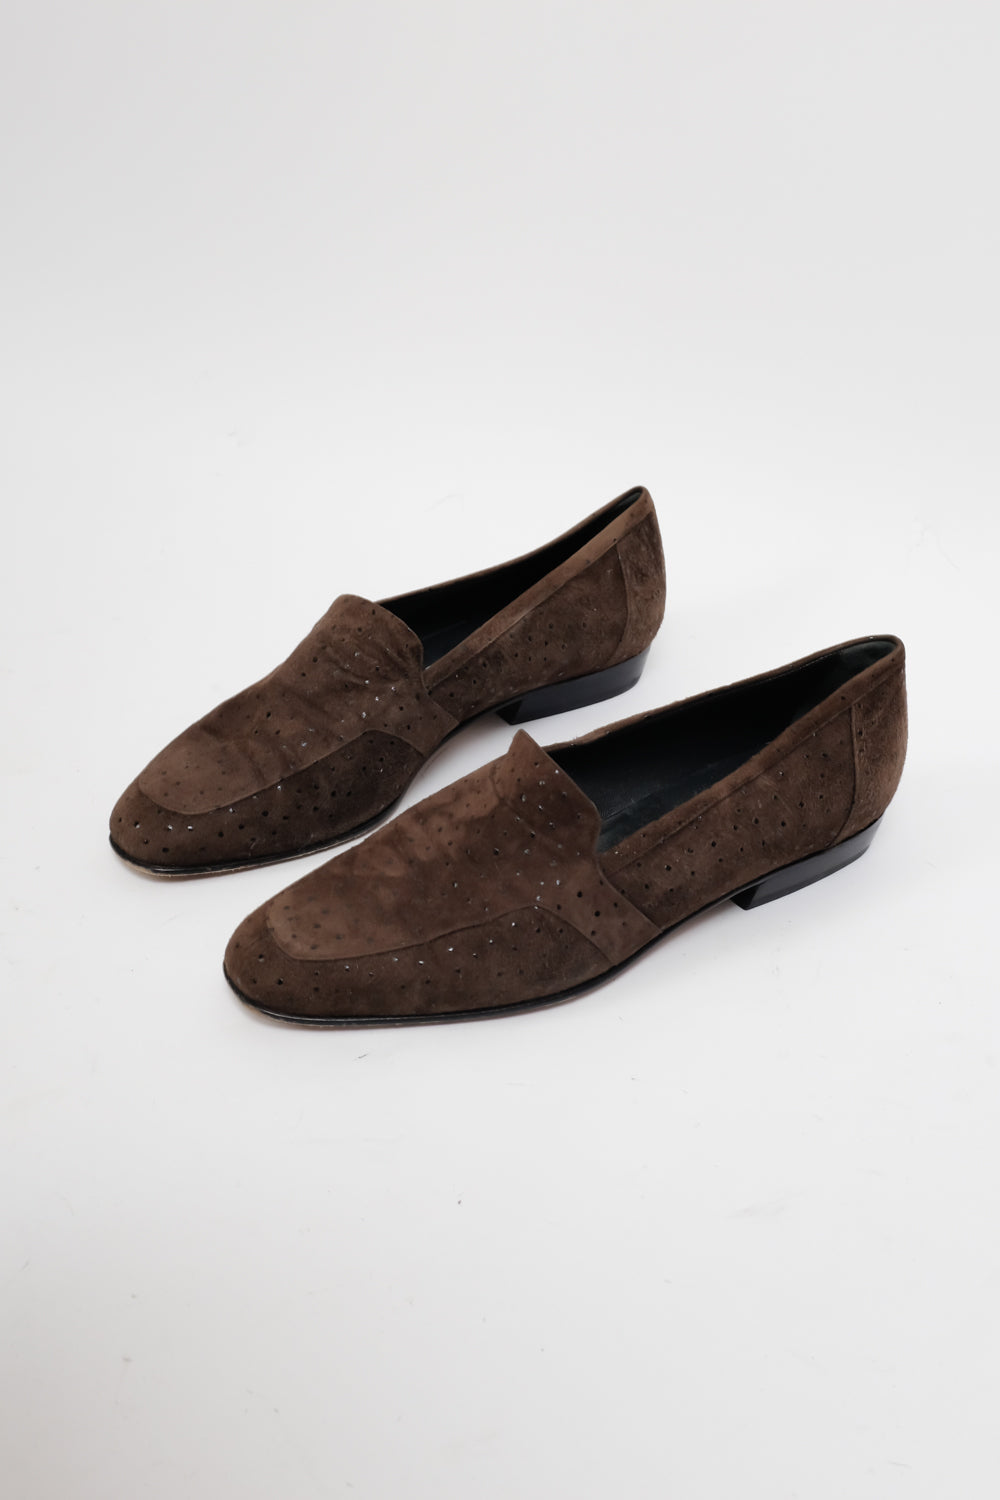 ITALY BROWN SUEDE LEATHER LOAFERS 40